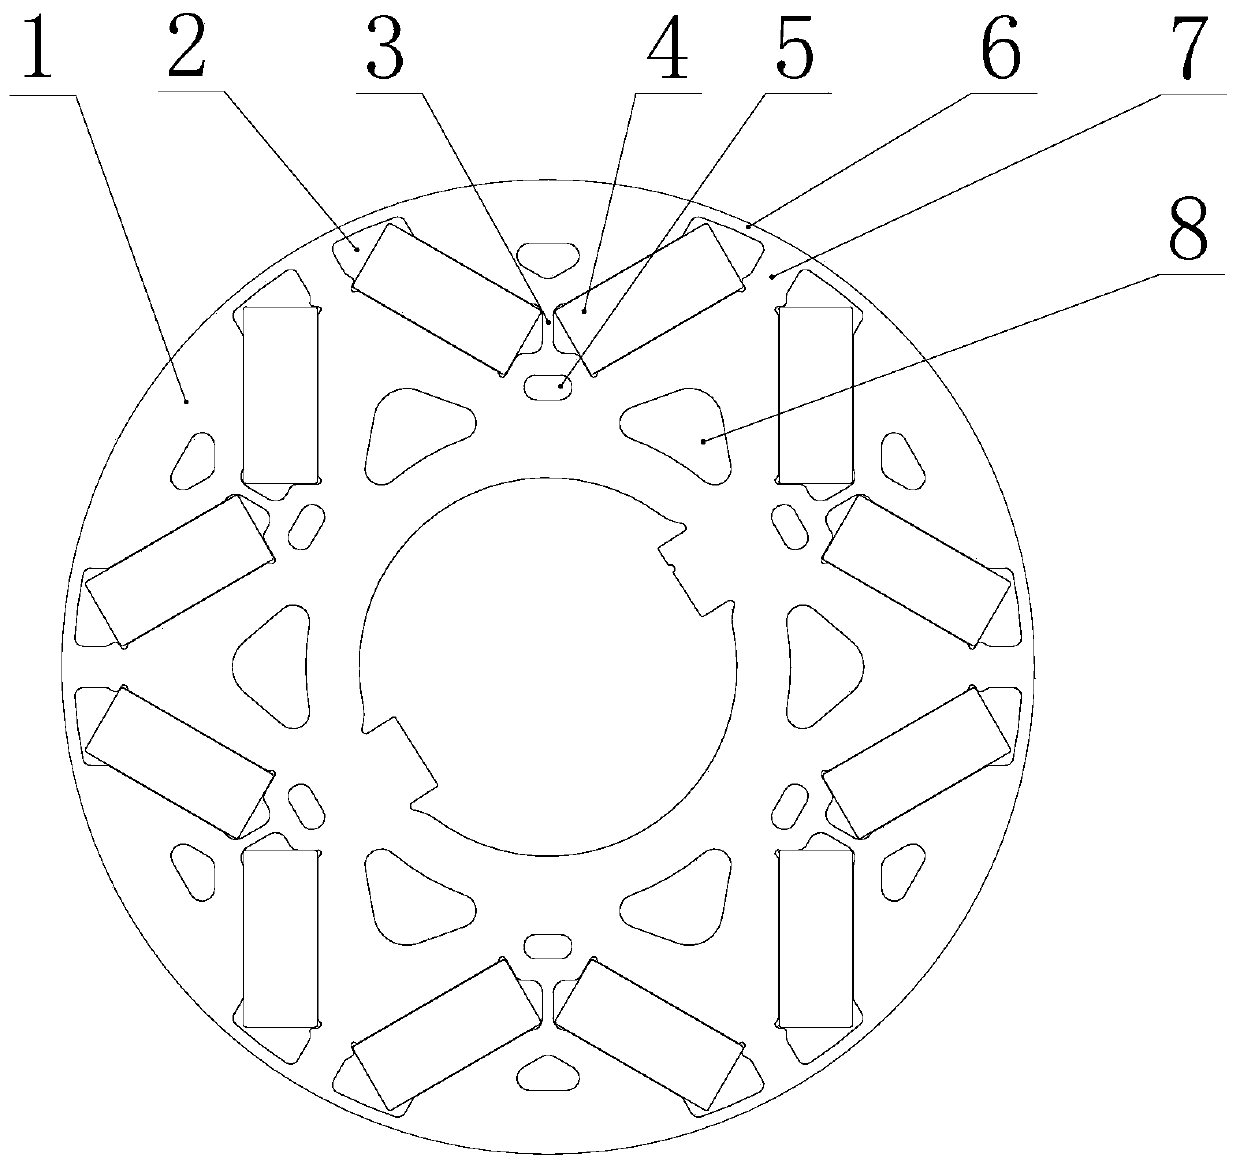 Rotor structure of a drive motor